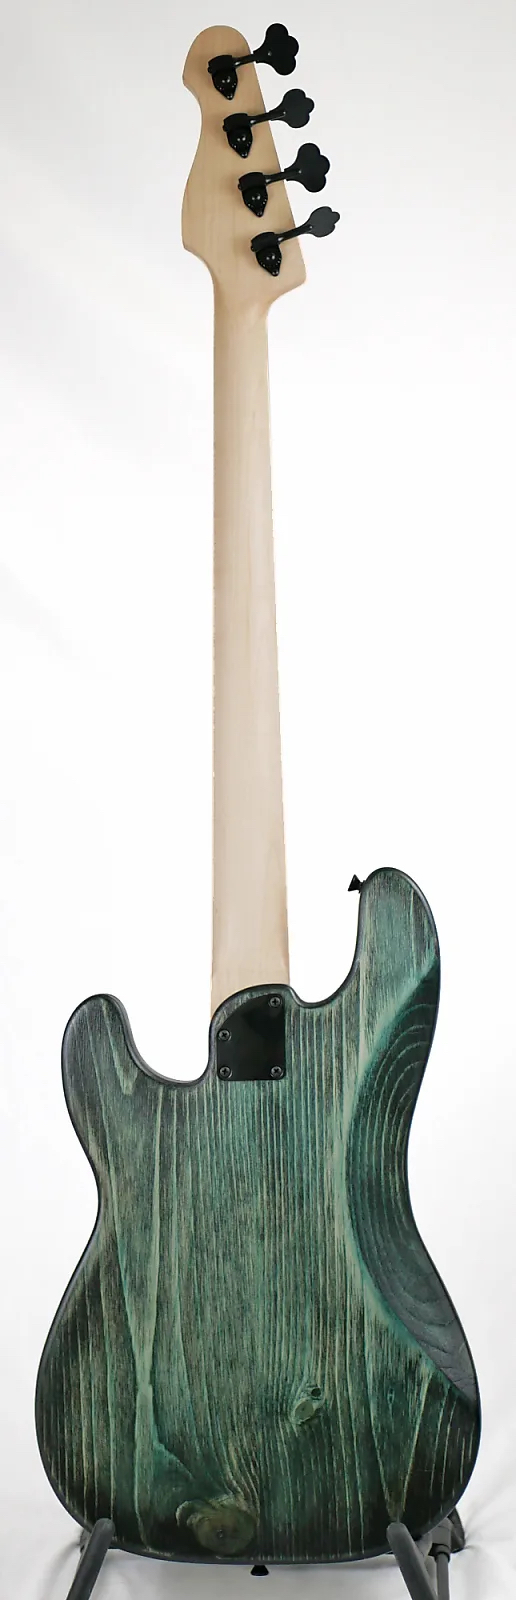 Full length image of the back of a Pamela PJ 34-Inch Long-Scale Bass in Teal Glow on Distressed Pine